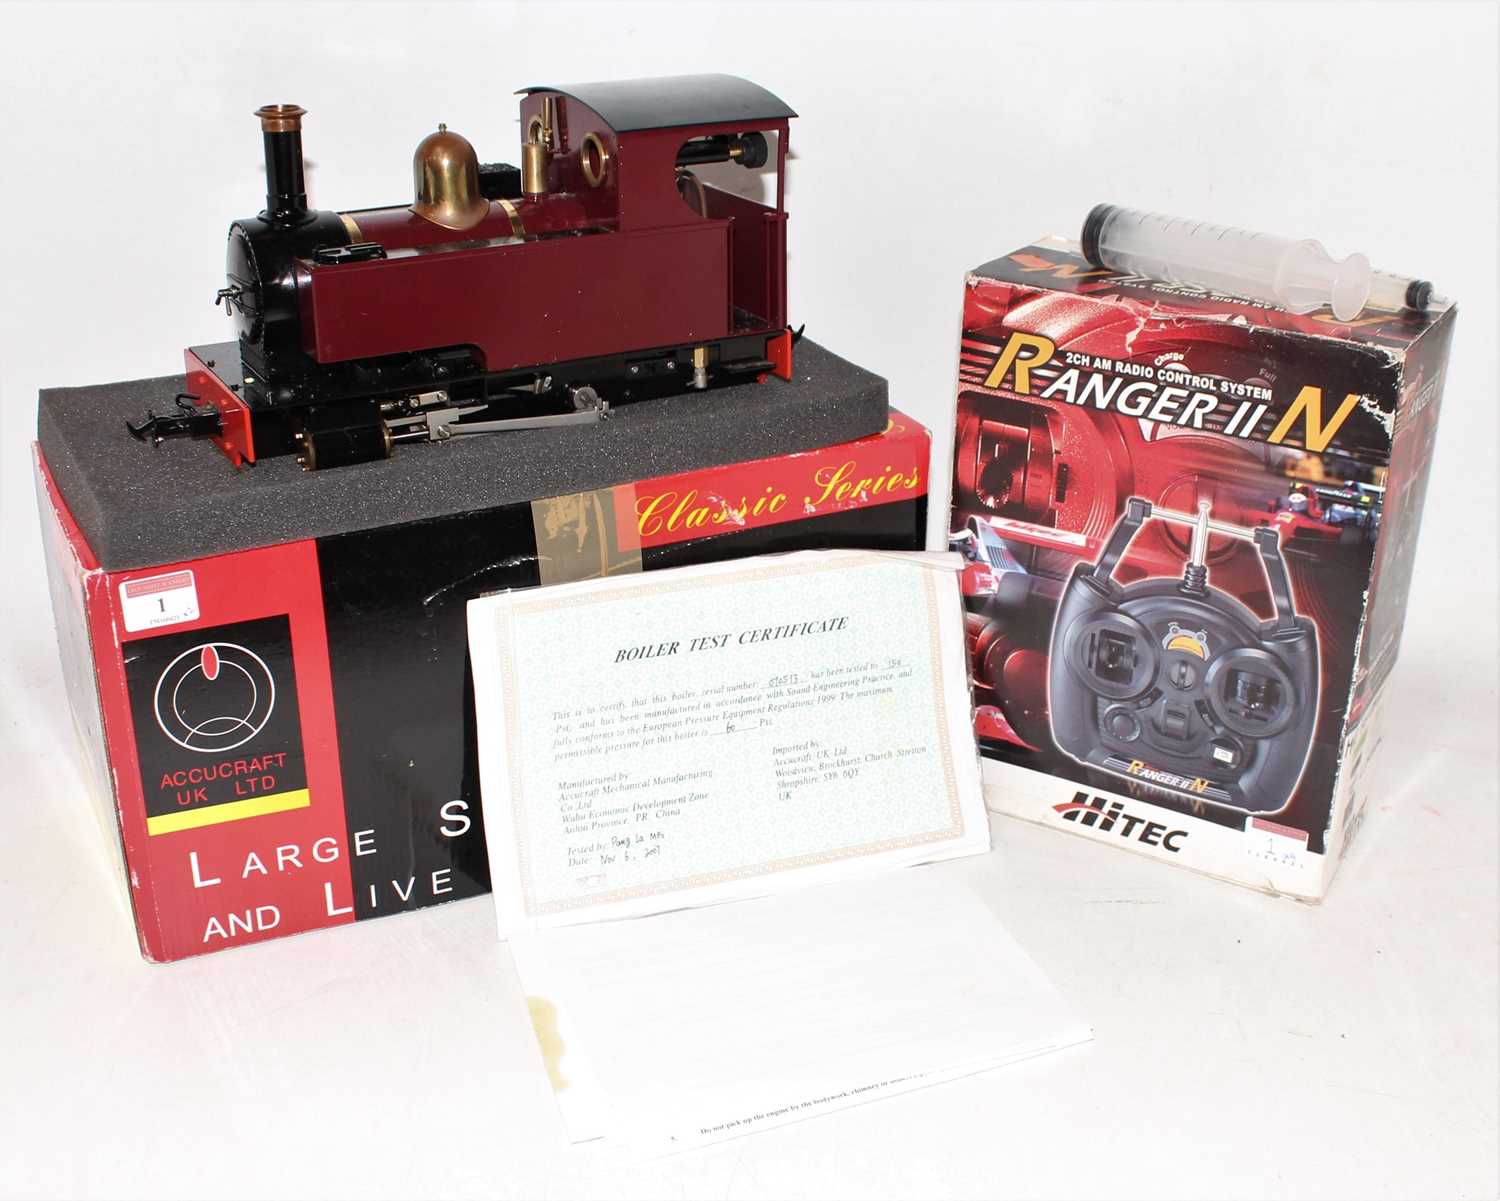 Lot 1 - Accucraft Gauge 1 Live Steam Gas Fired model...